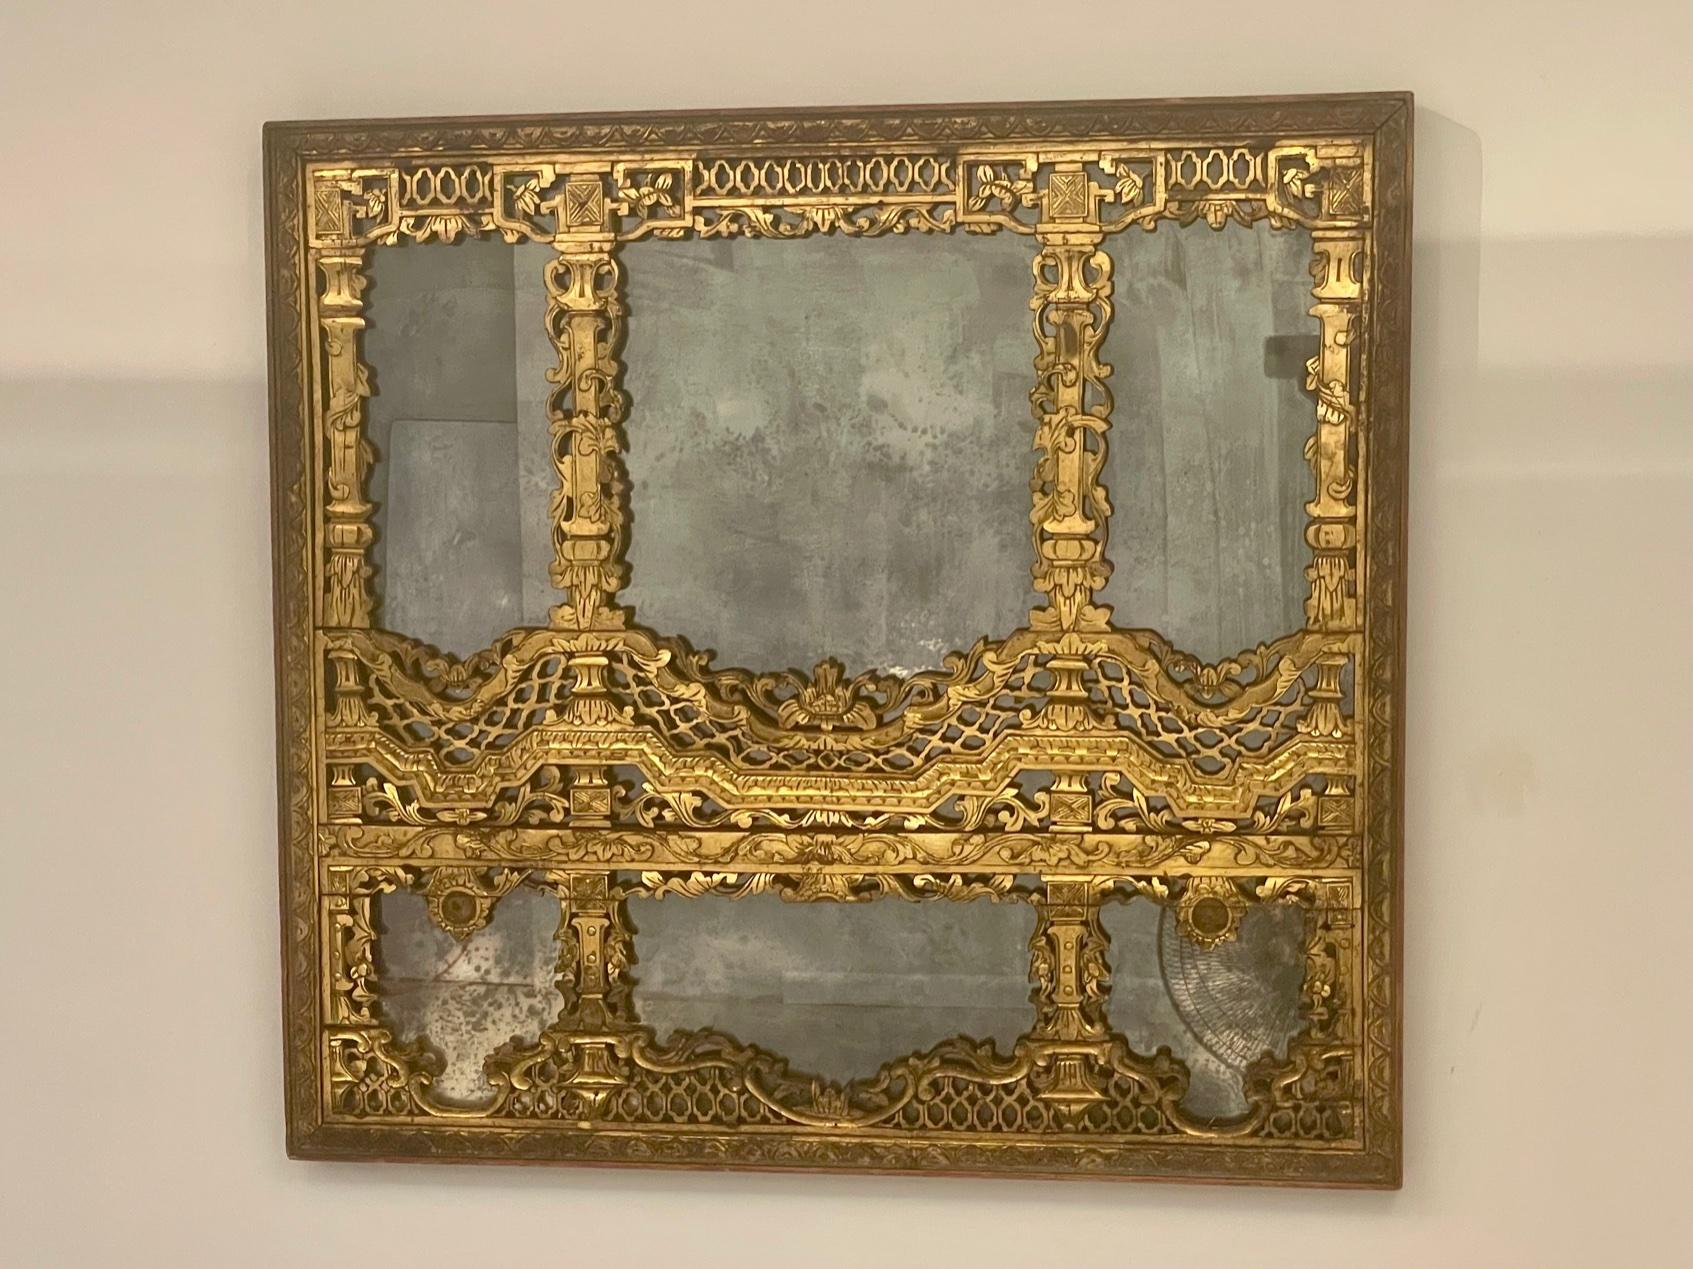 Magnificent intricately carved gilded Chinese mirror having aged mirror and superb ornate fretwork. Circa Late Qing Dynasty.